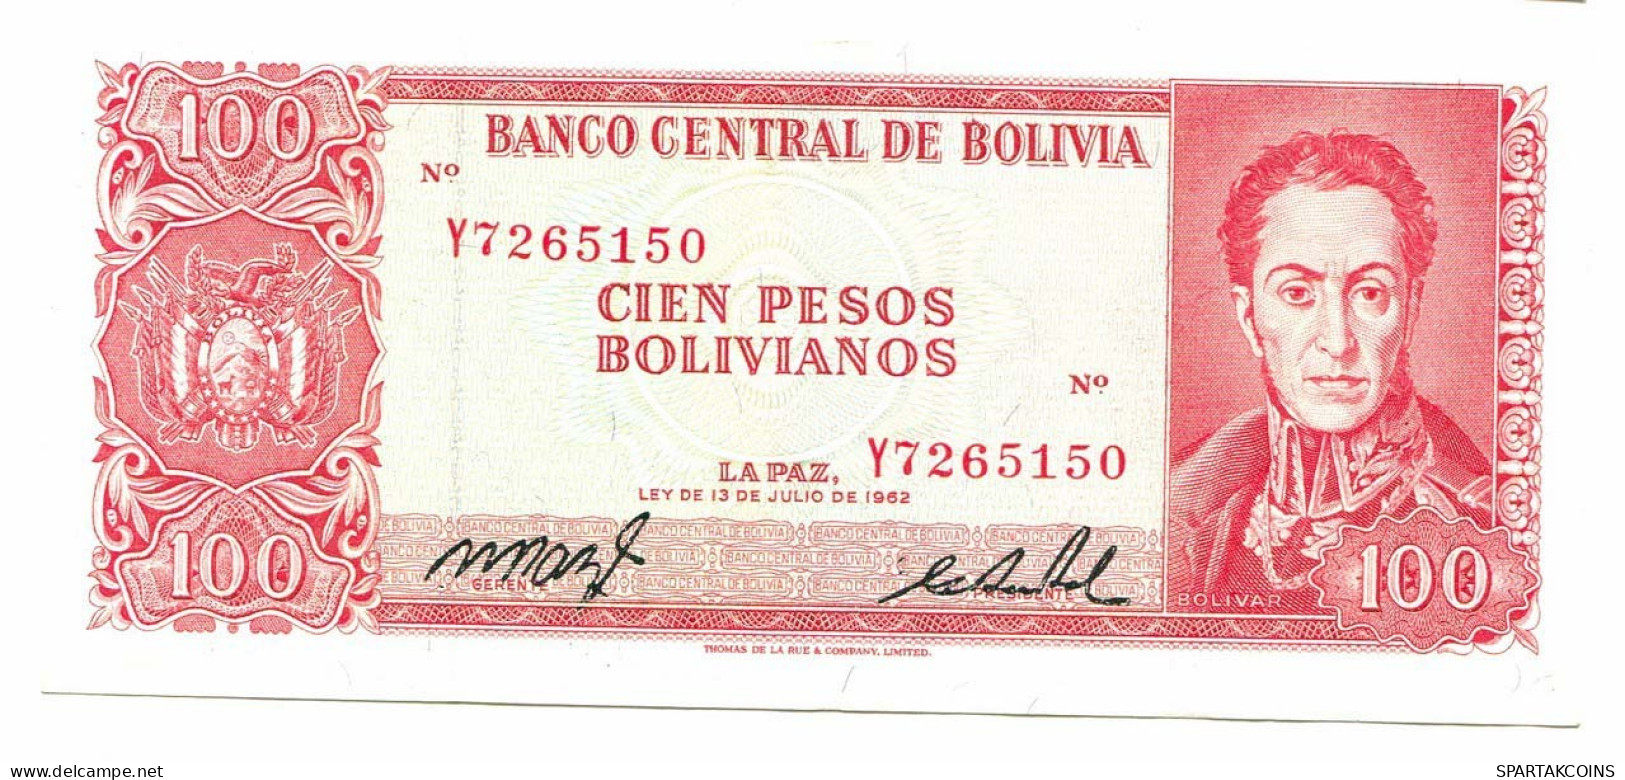 BOLIVIA 100 PESOS BOLIVIANOS 1962 AUNC Paper Money Banknote #P10803.4 - [11] Local Banknote Issues